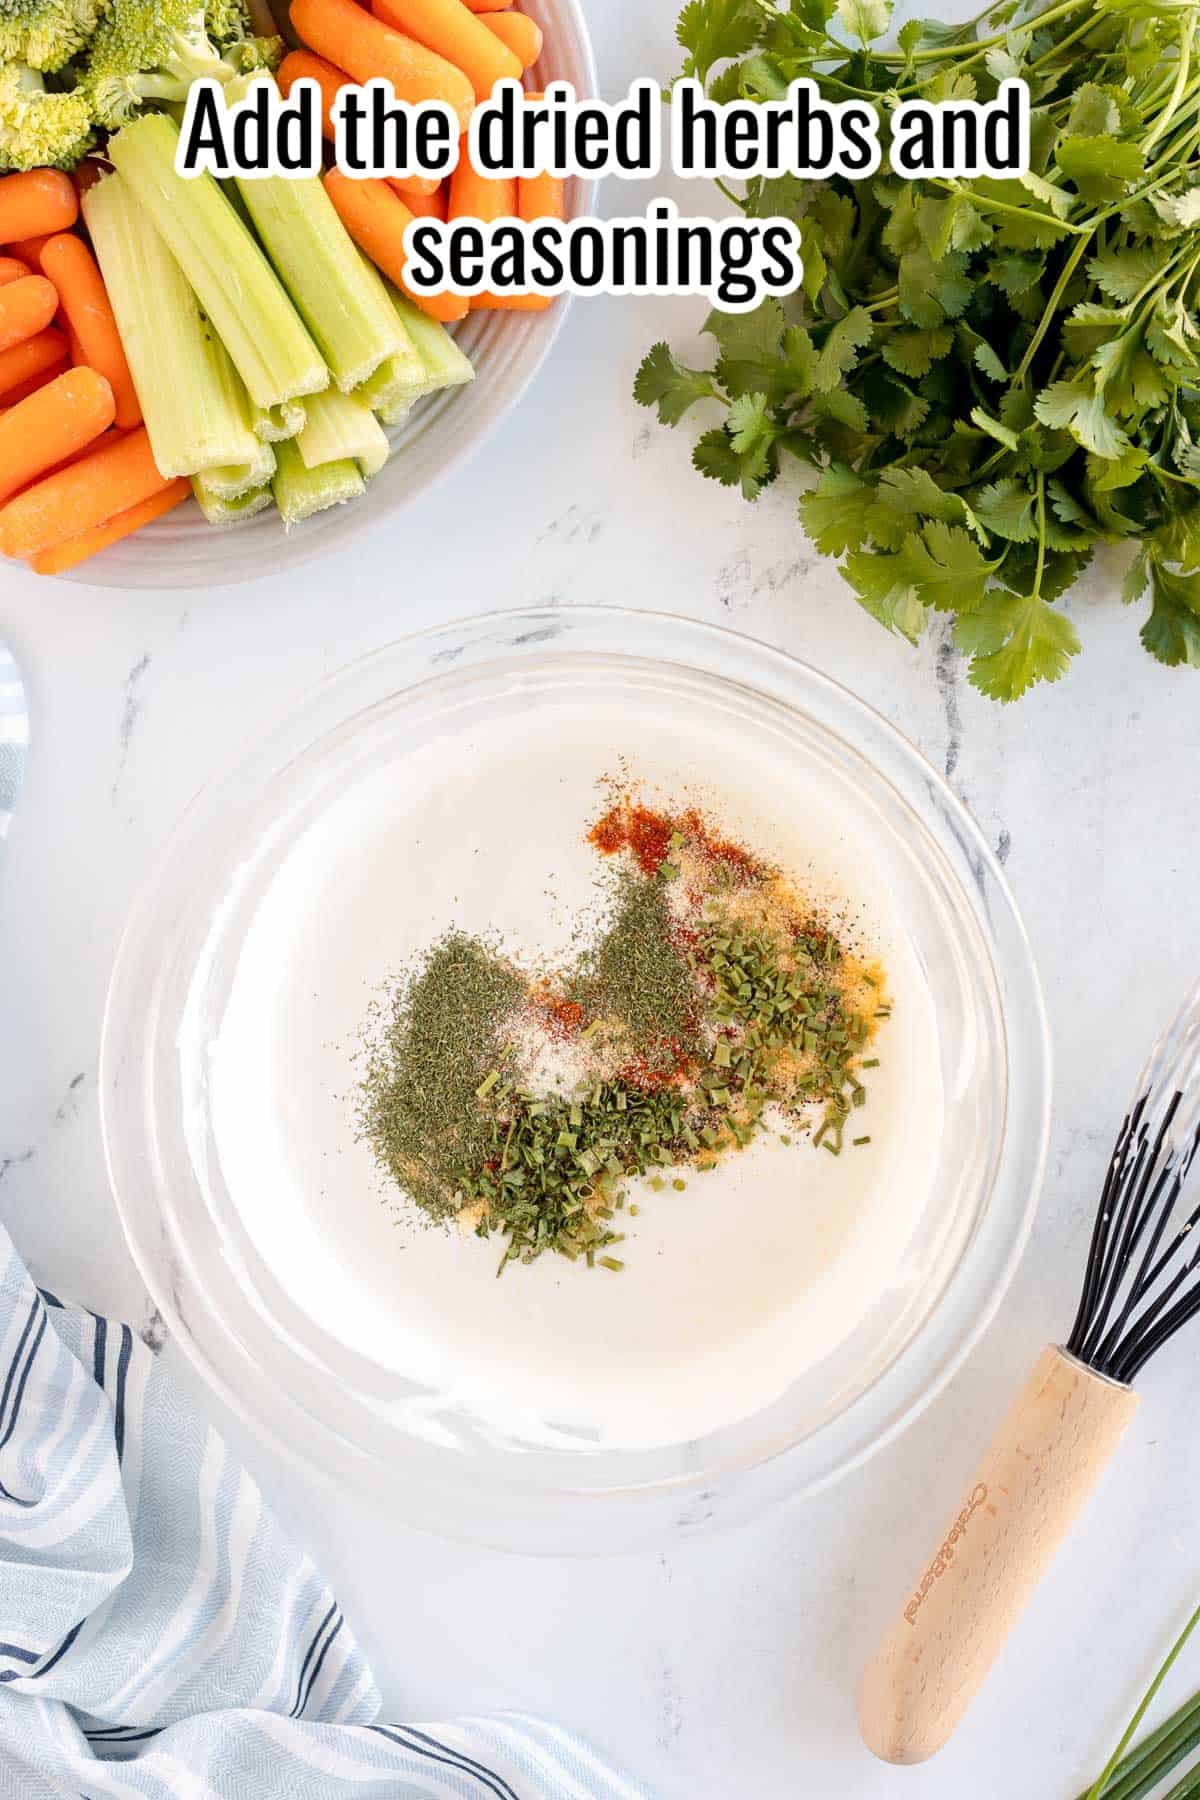 a bowl of homemade ranch dip with a whisk and fresh veggies.